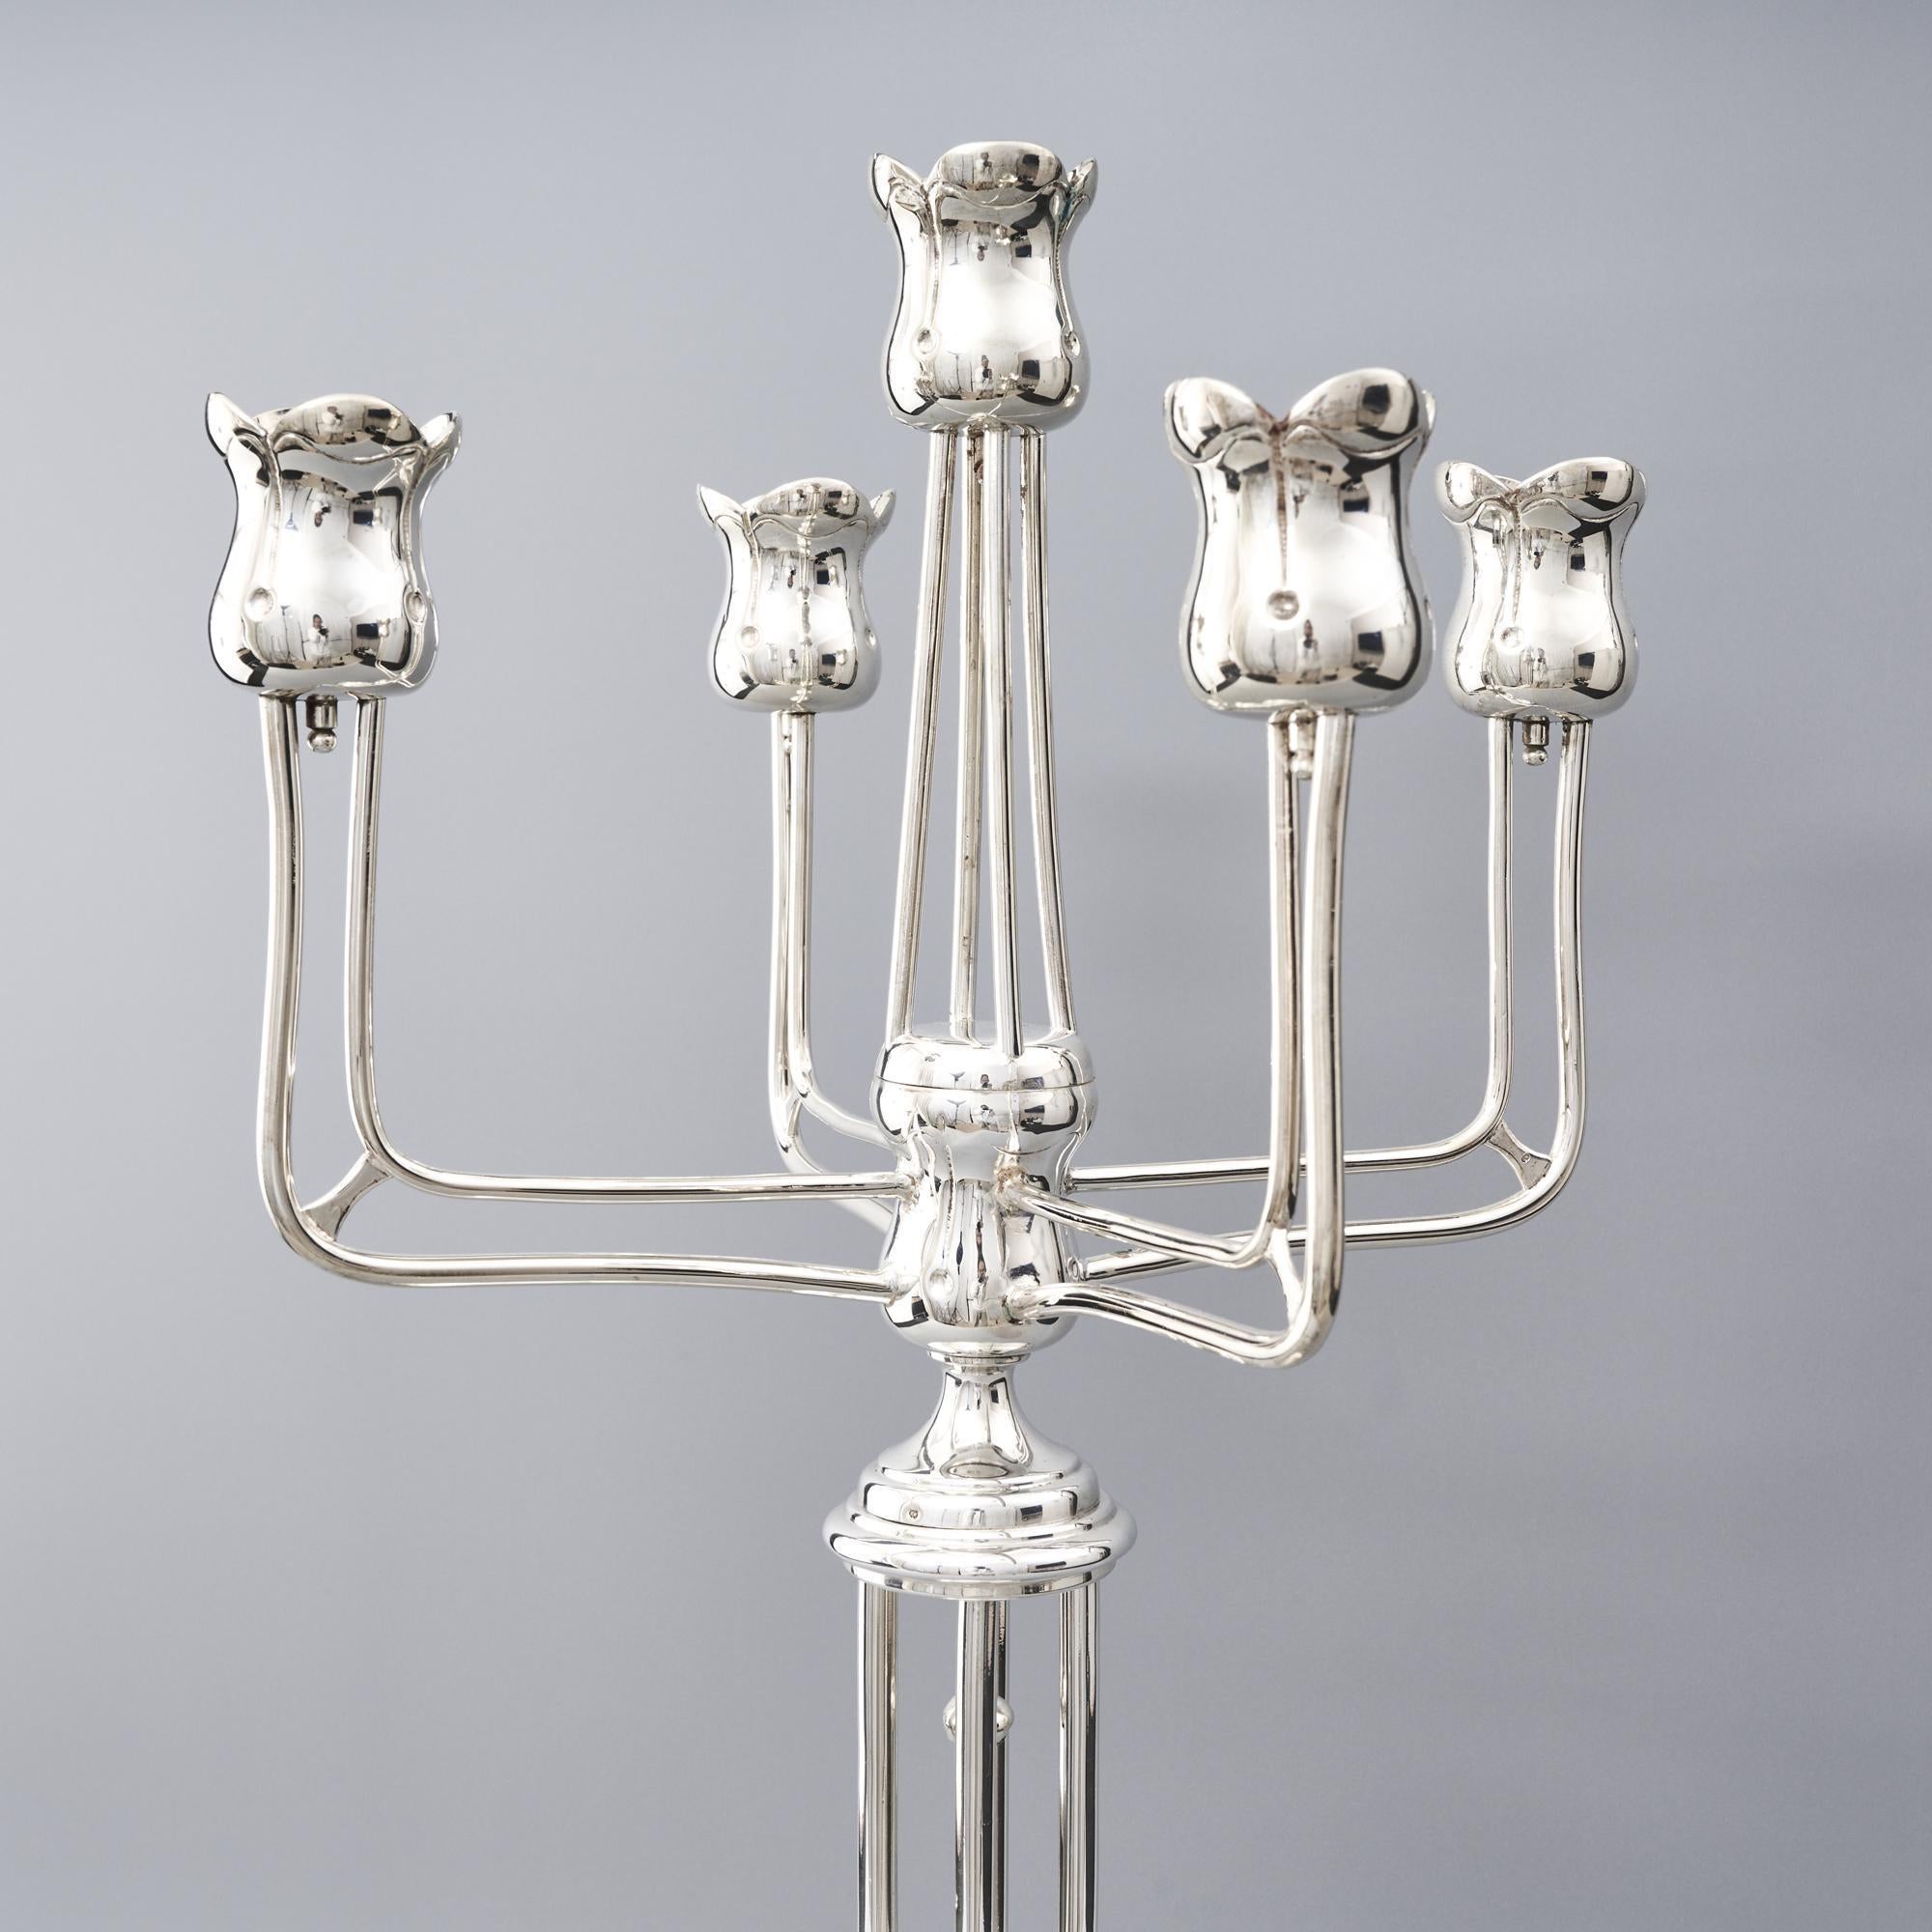 This is a large antique Austrian Secessionist period silver candelabrum by Emil Kadzik. The domed base with its central column and fins, five stems and stylised tulip-shaped flower candleholders, personify this era of design. 

This is a lovely